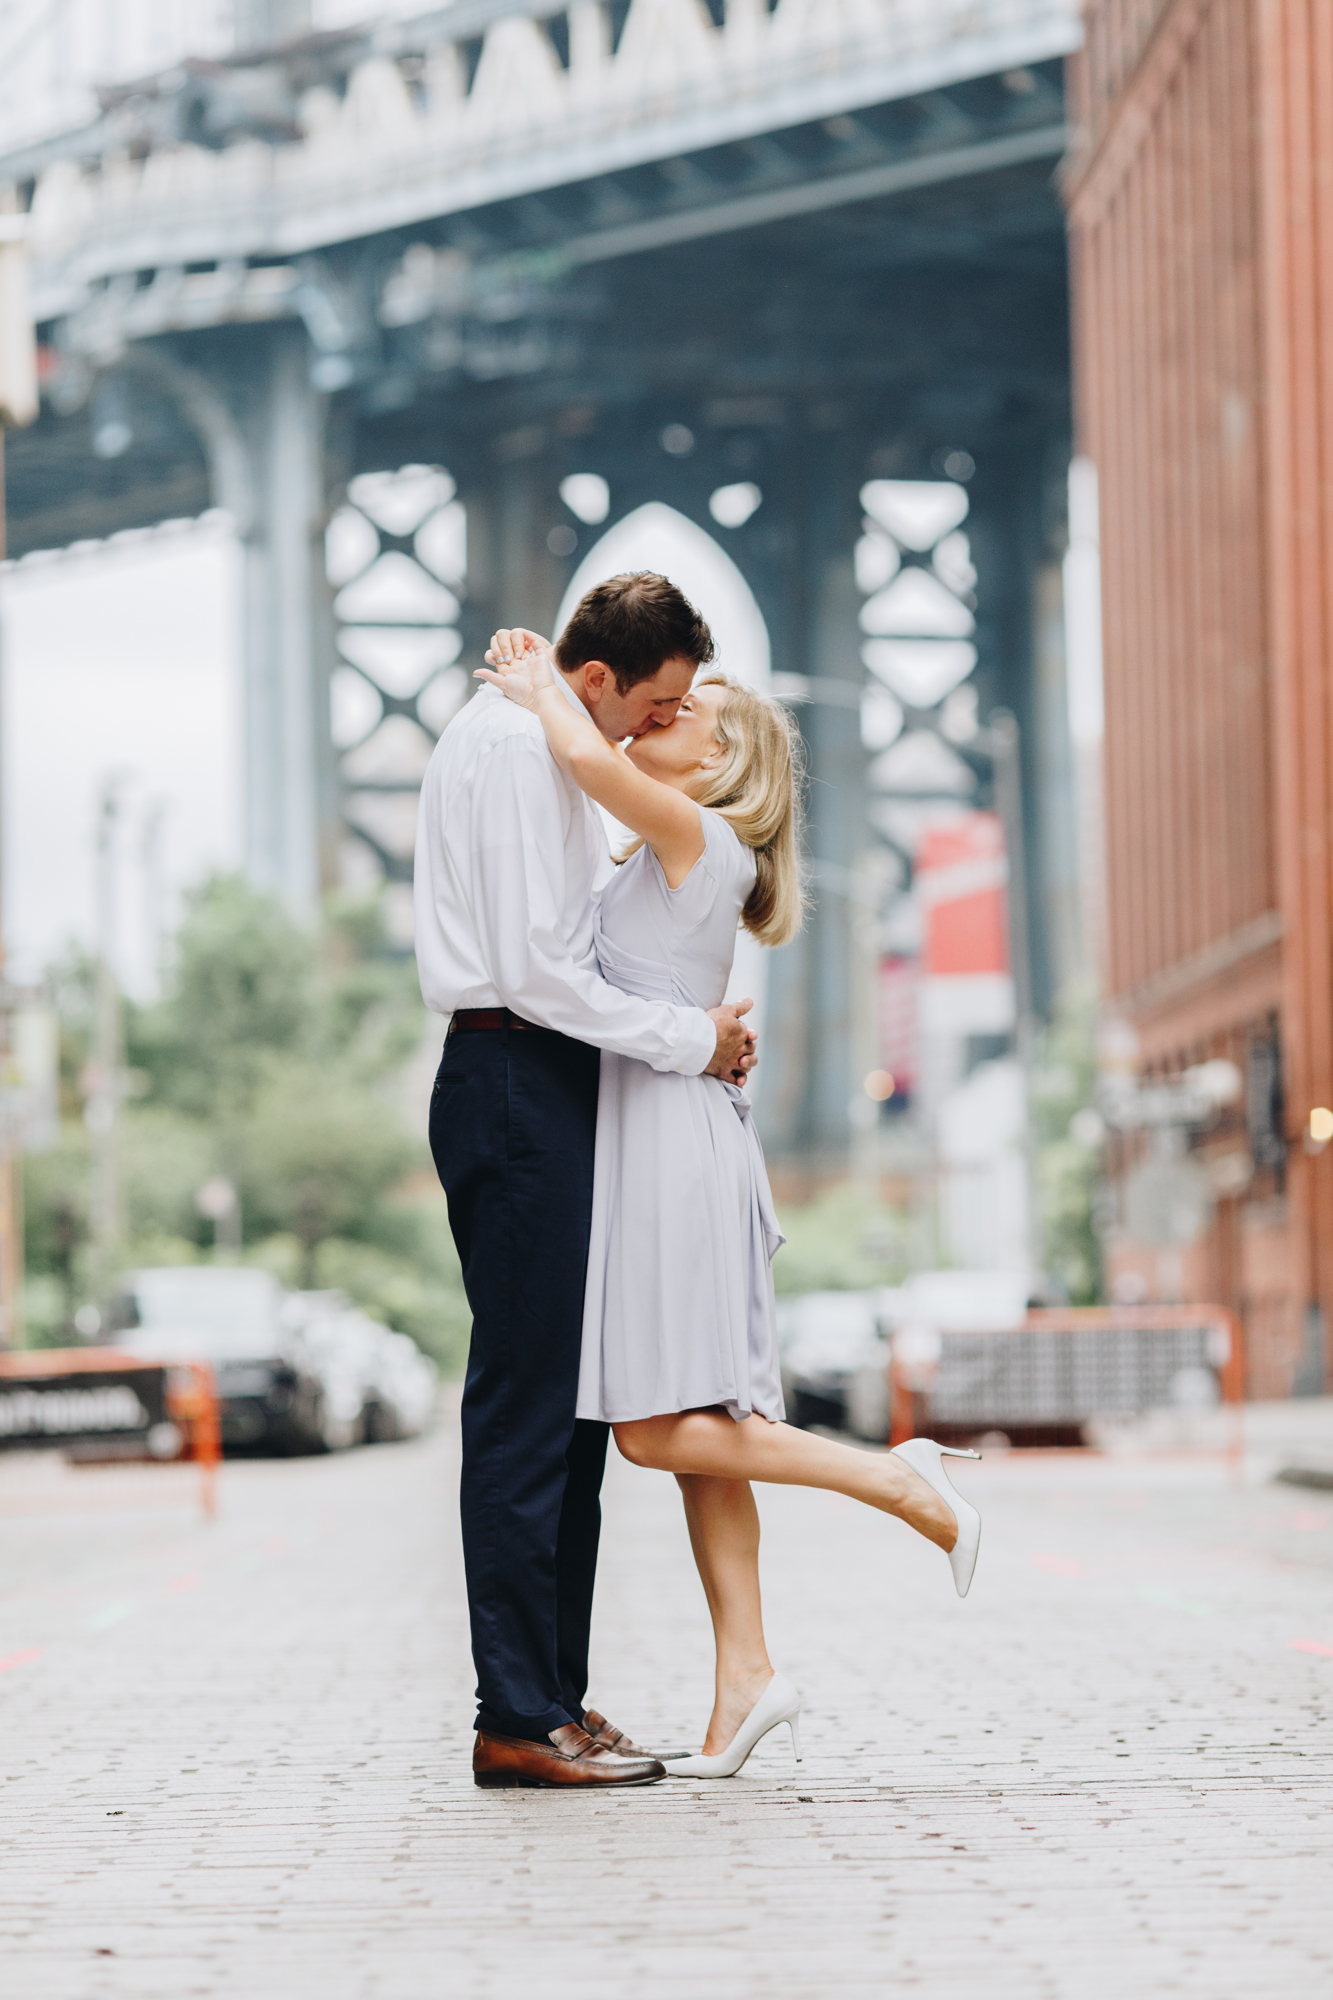 Touching Brooklyn Bridge Park Engagement Photos on a Cloudy Day in New York